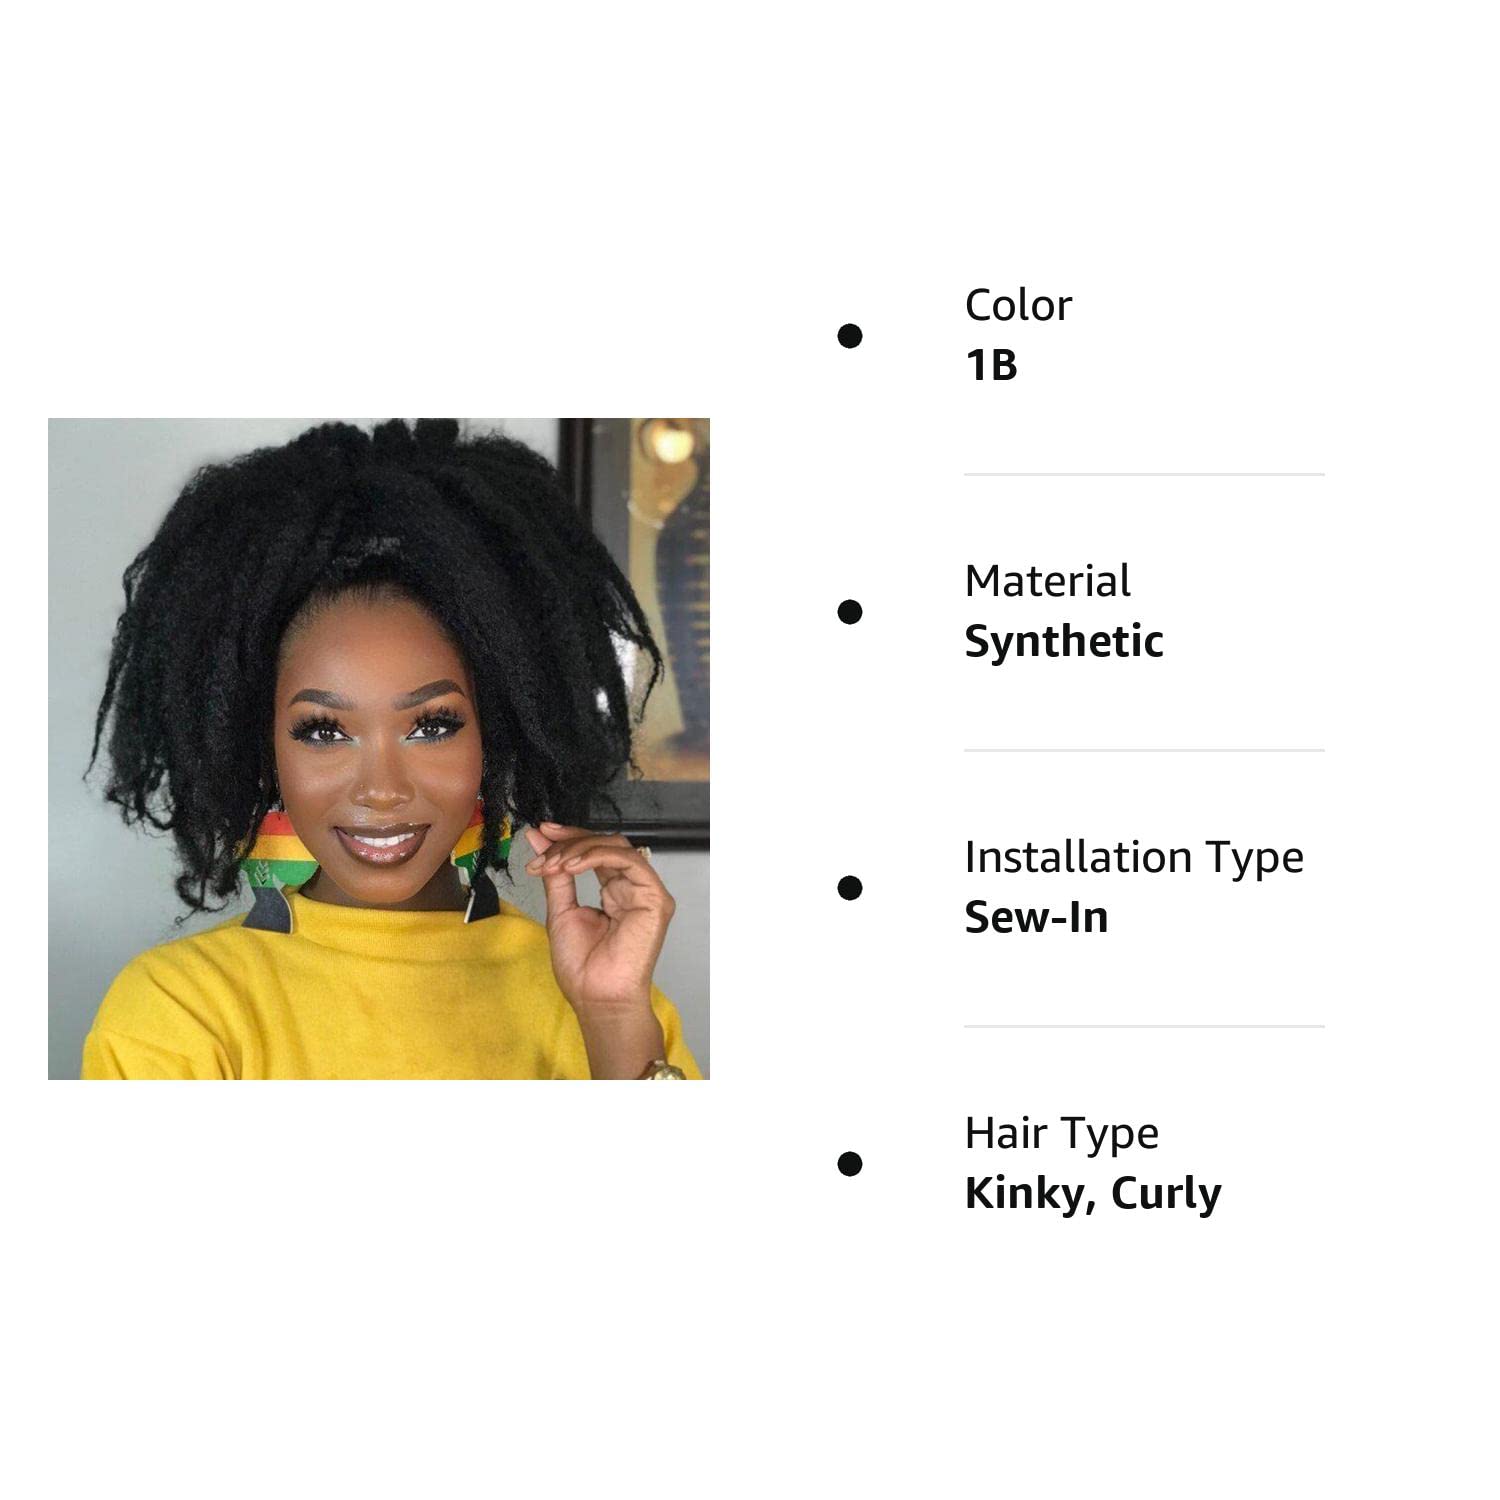 FAST SHIPPING 3-5 DAY Marley Hair | ToyoTress Marley Twist Hair - Short Black Marley Hair For Faux Locs, Afro Kinky Curly Marley Twist Braiding Hair Extensions Synthetic